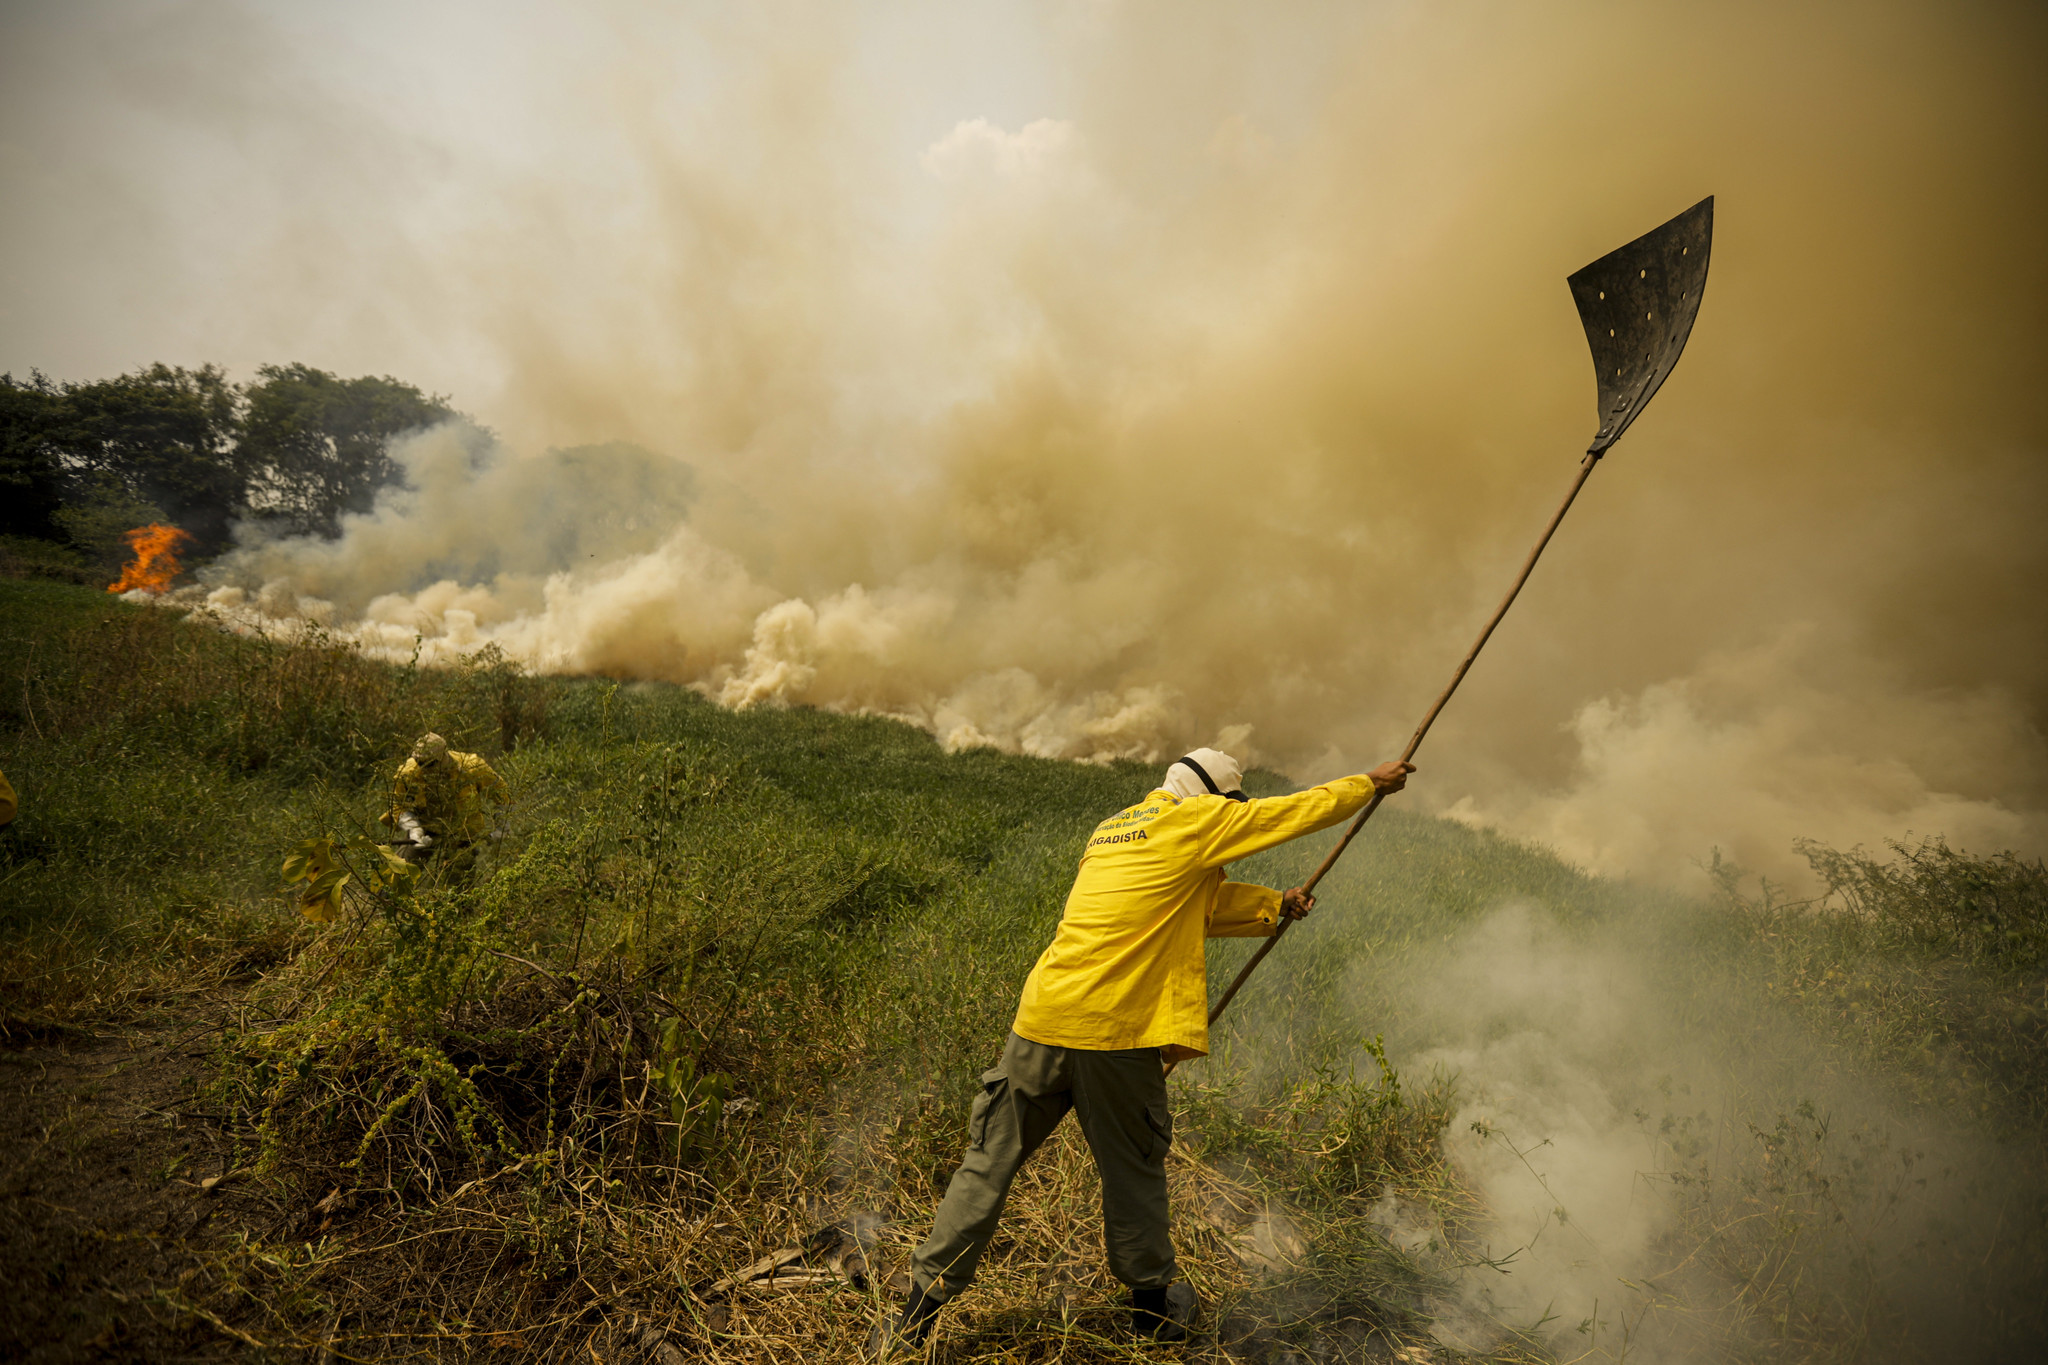 ICMBio firefighters battle forest fires in the Pantanal. Photo: Joédson Alves/Agência Brasil